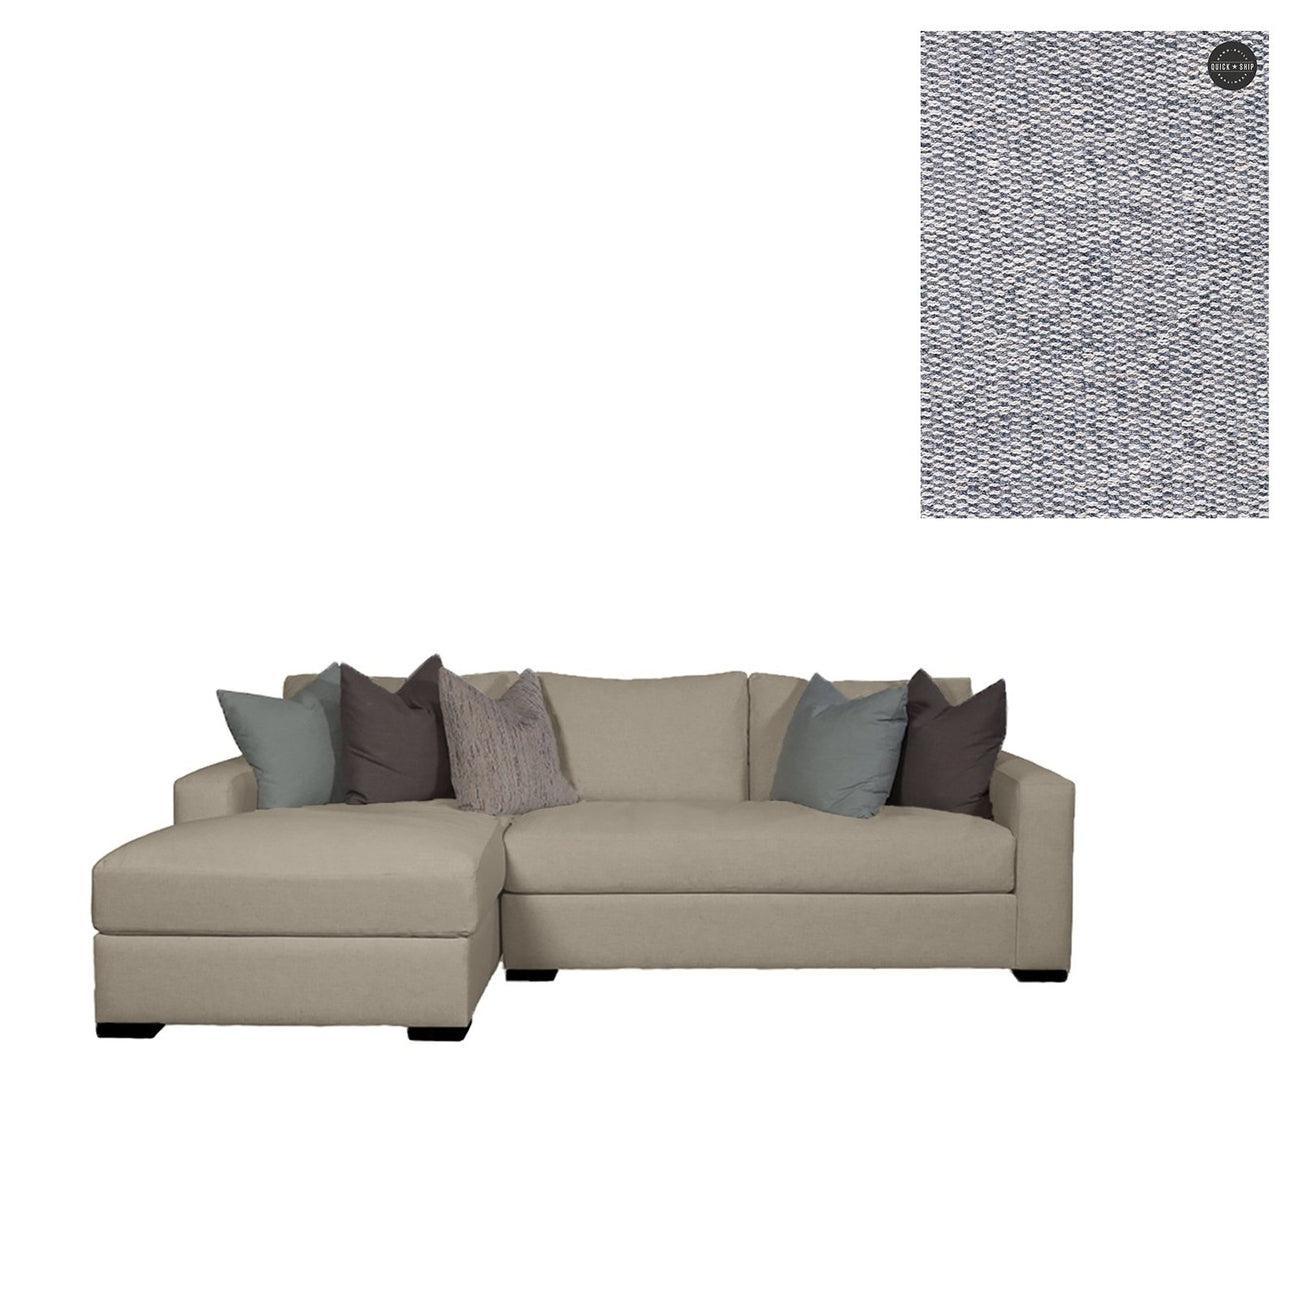 Gia Sectional-Younger-YNGR-49537-49561-3111-SC-SectionalsRight Arm Facing Chaise-Standard Cushion-Polyester/Linen-3111-41-France and Son